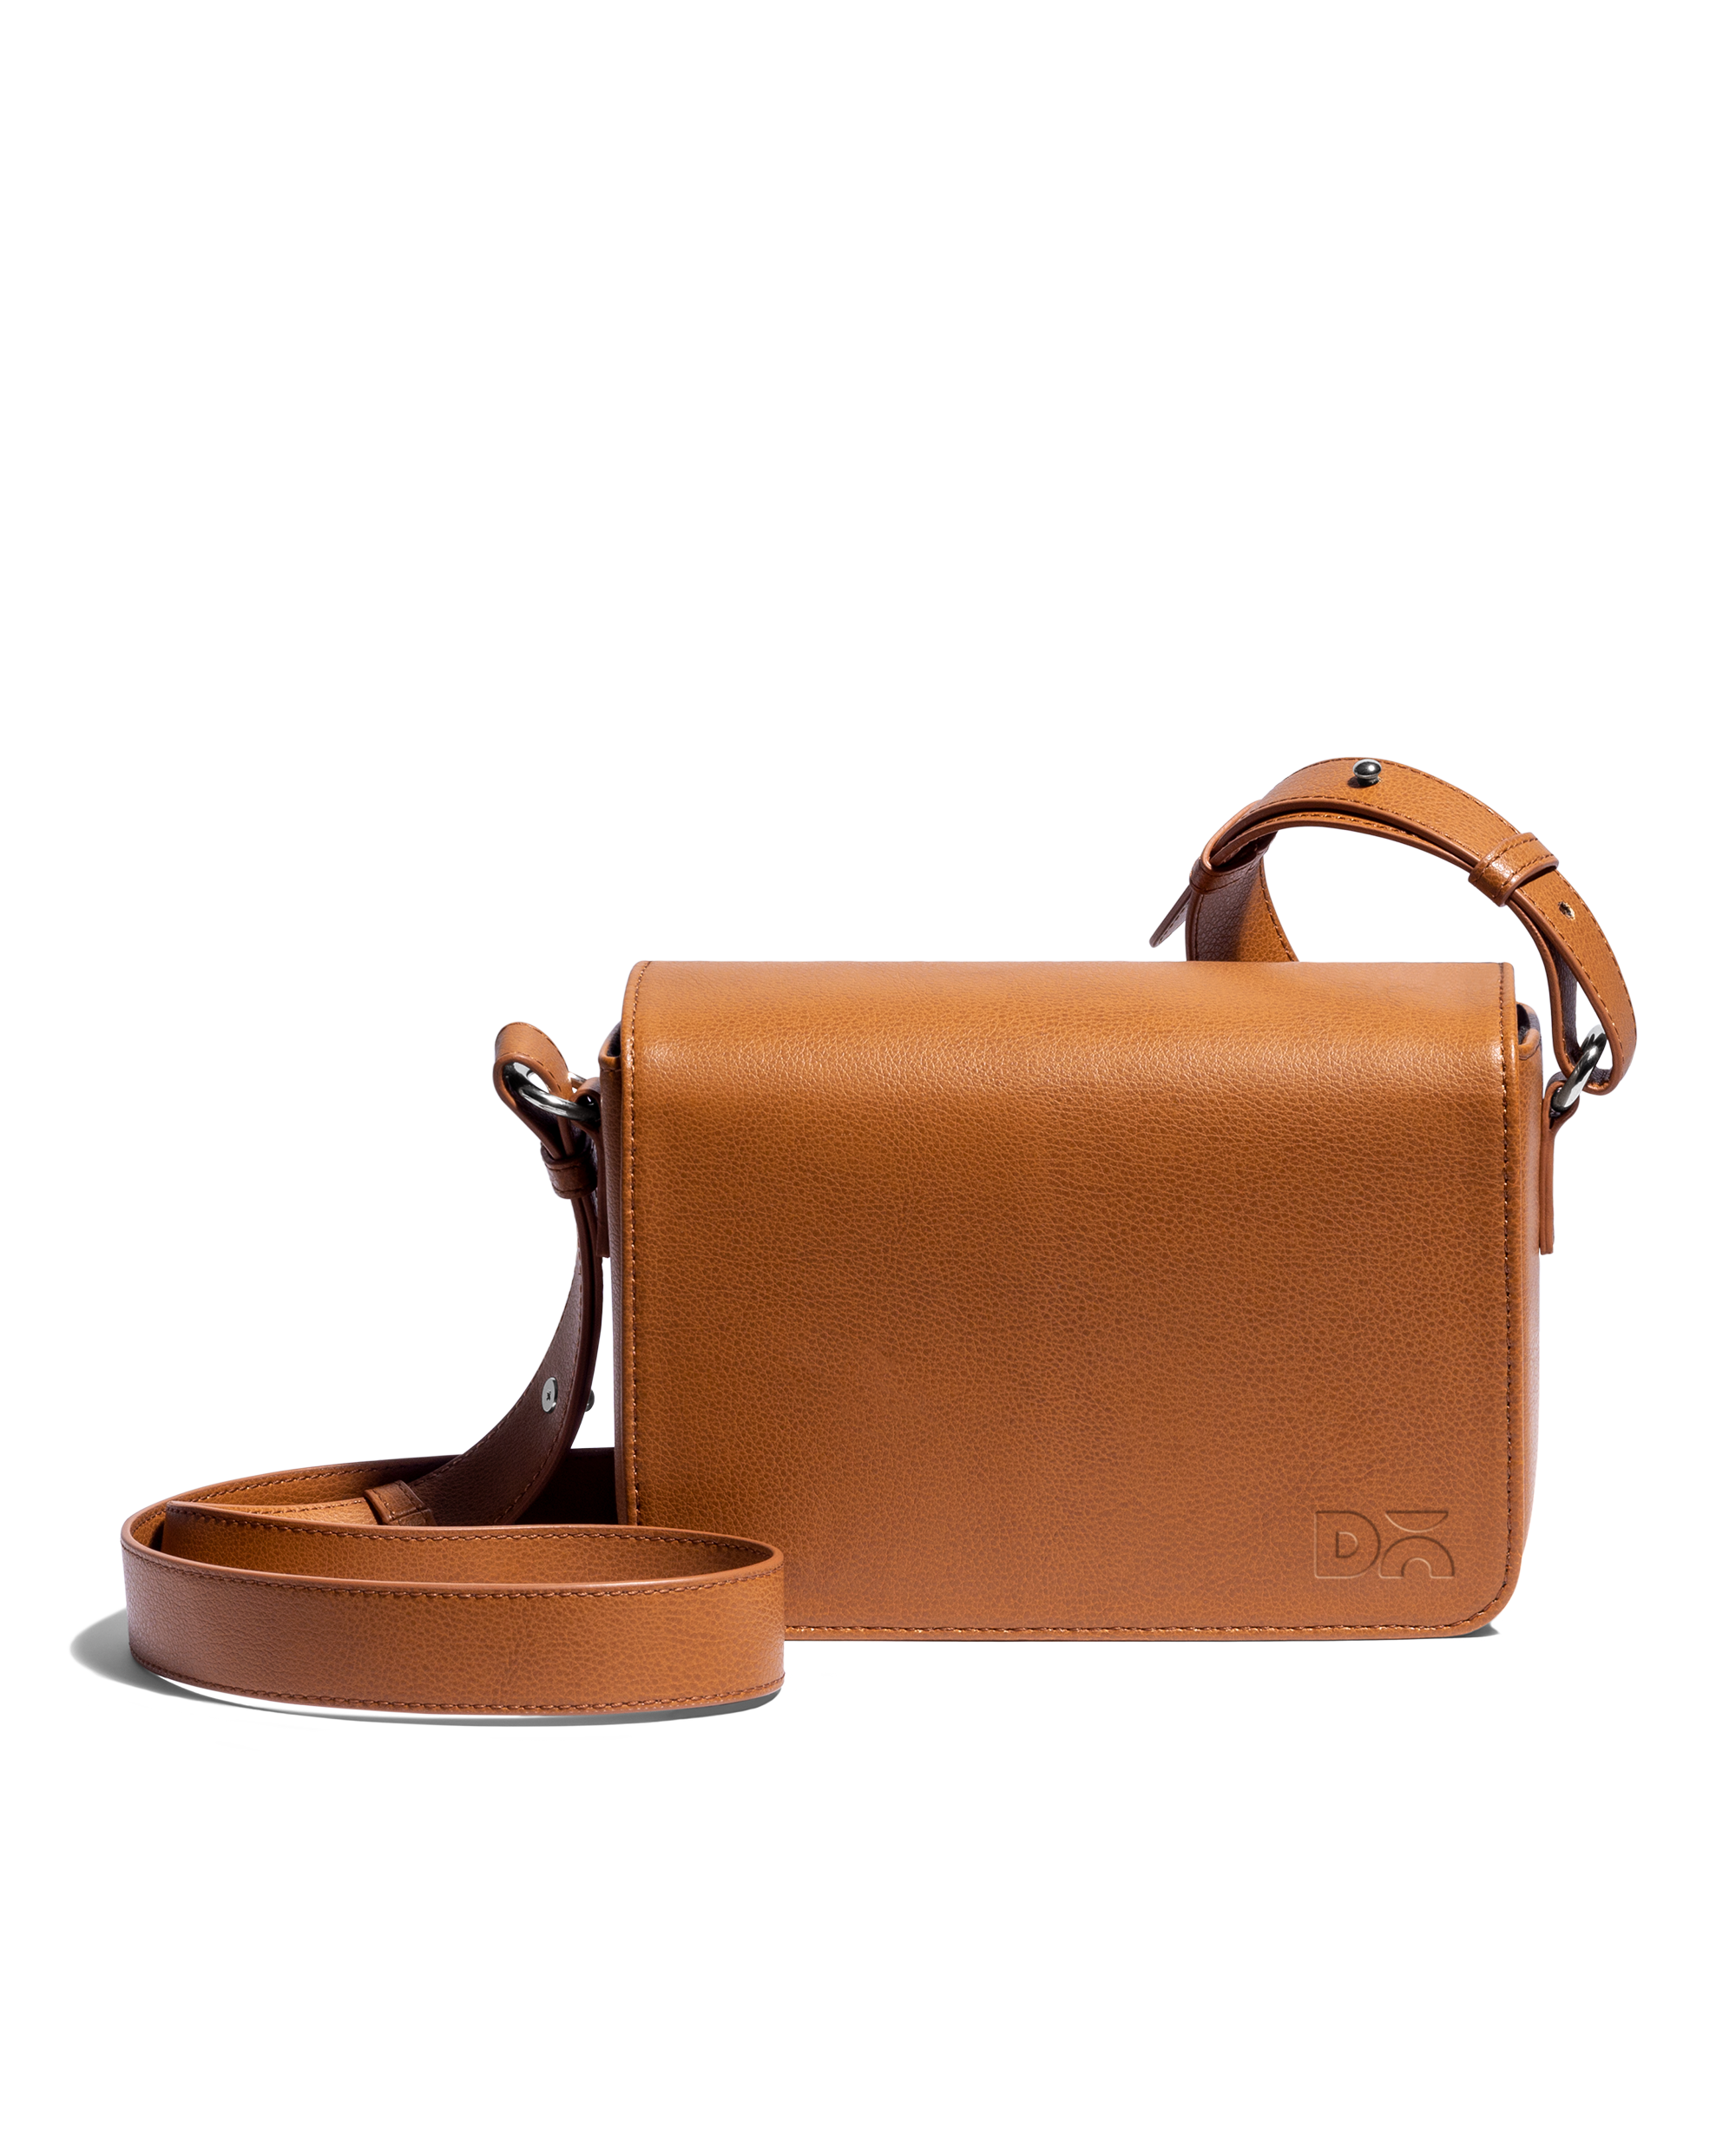 Best crossbody bags 2021: Designer and leather options | The Independent